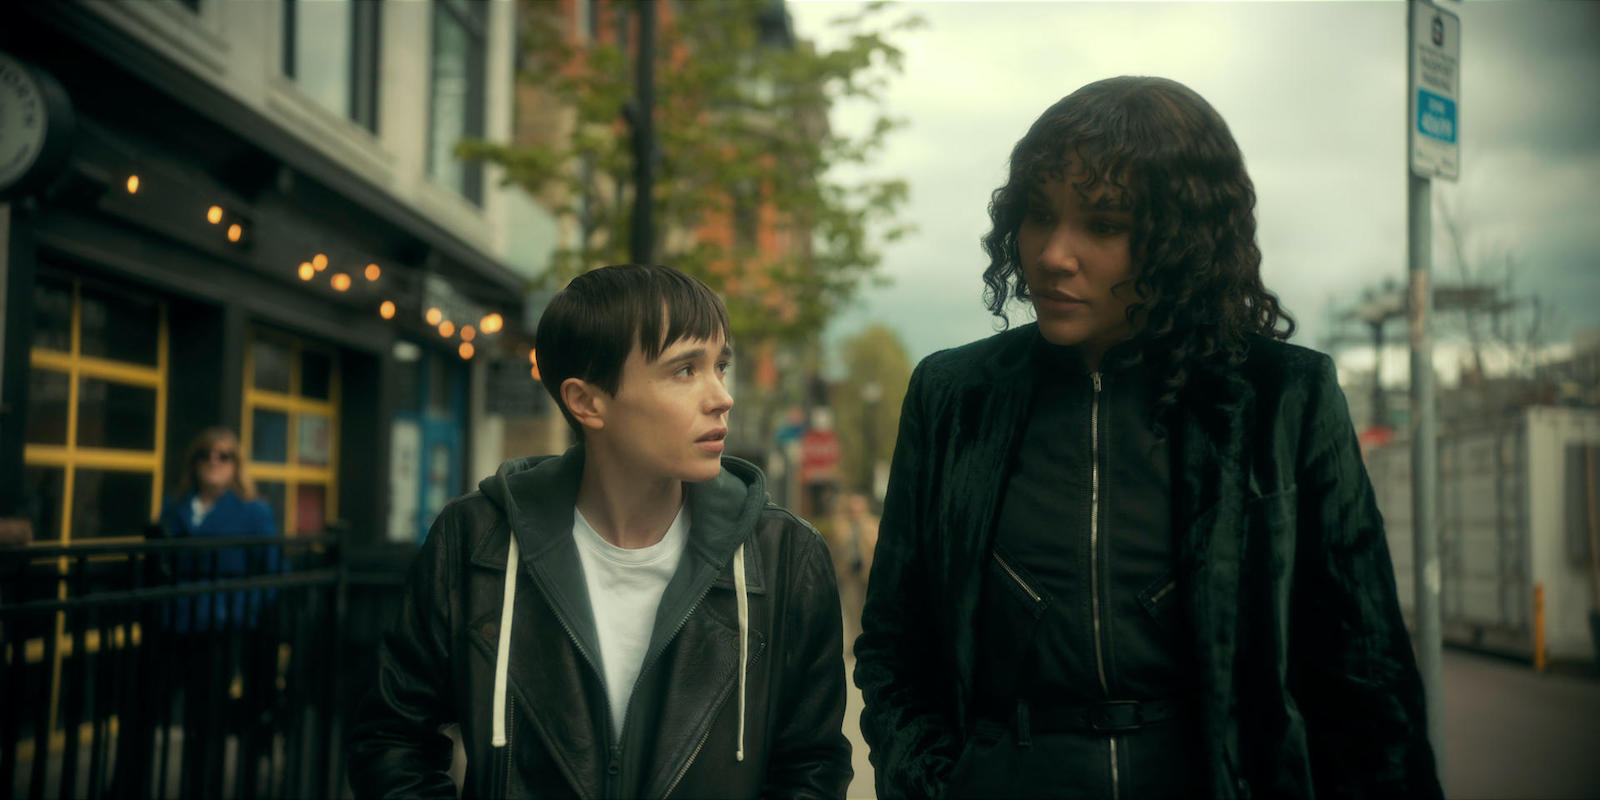 Viktor (Elliot Page) and Allison (Emmy Raver-Lampman) discuss what to do about Harlan in 'The Umbrella Academy' Season 3